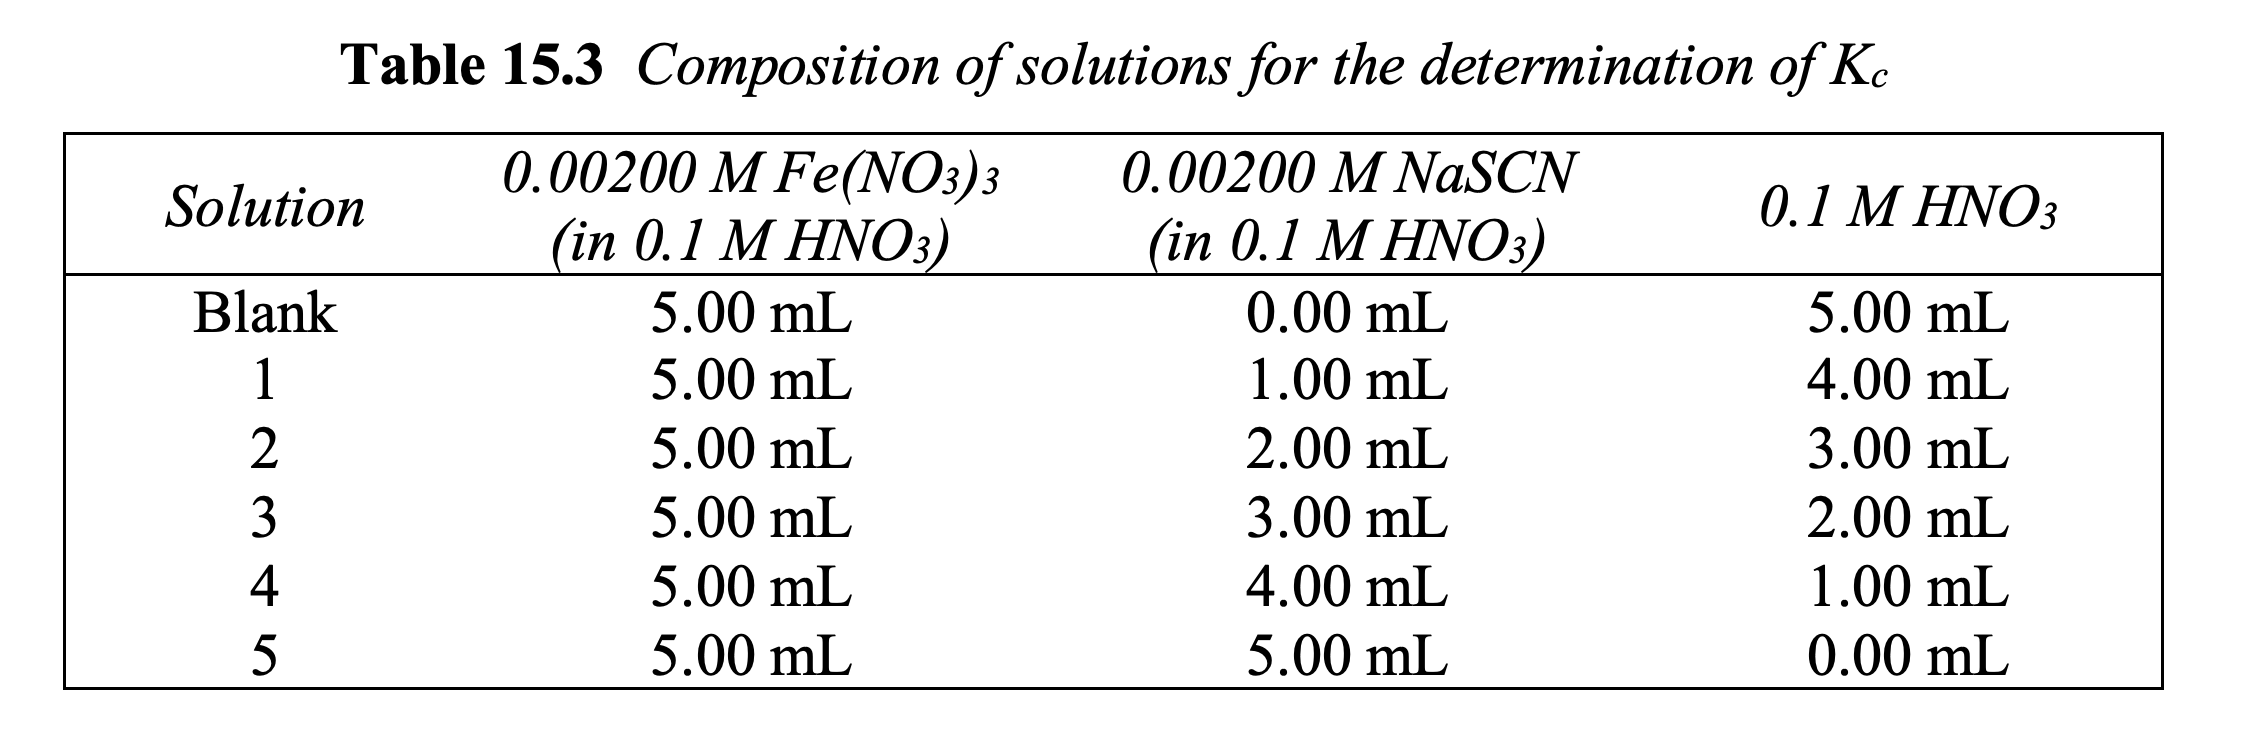 Table 15.3 Composition of solutions for the determination of K.
0.00200 M Fe(NO3)3
(in 0.1 M HNO3)
0.00200 M NASCN
(in 0.1 M HNO3)
Solution
0.1 M HNO3
Blank
5.00 mL
0.00 mL
5.00 mL
5.00 mL
1.00 mL
4.00 mL
5.00 mL
2.00 mL
3.00 mL
5.00 mL
3.00 mL
2.00 mL
4
5.00 mL
4.00 mL
1.00 mL
5.00 mL
5.00 mL
0.00 mL
